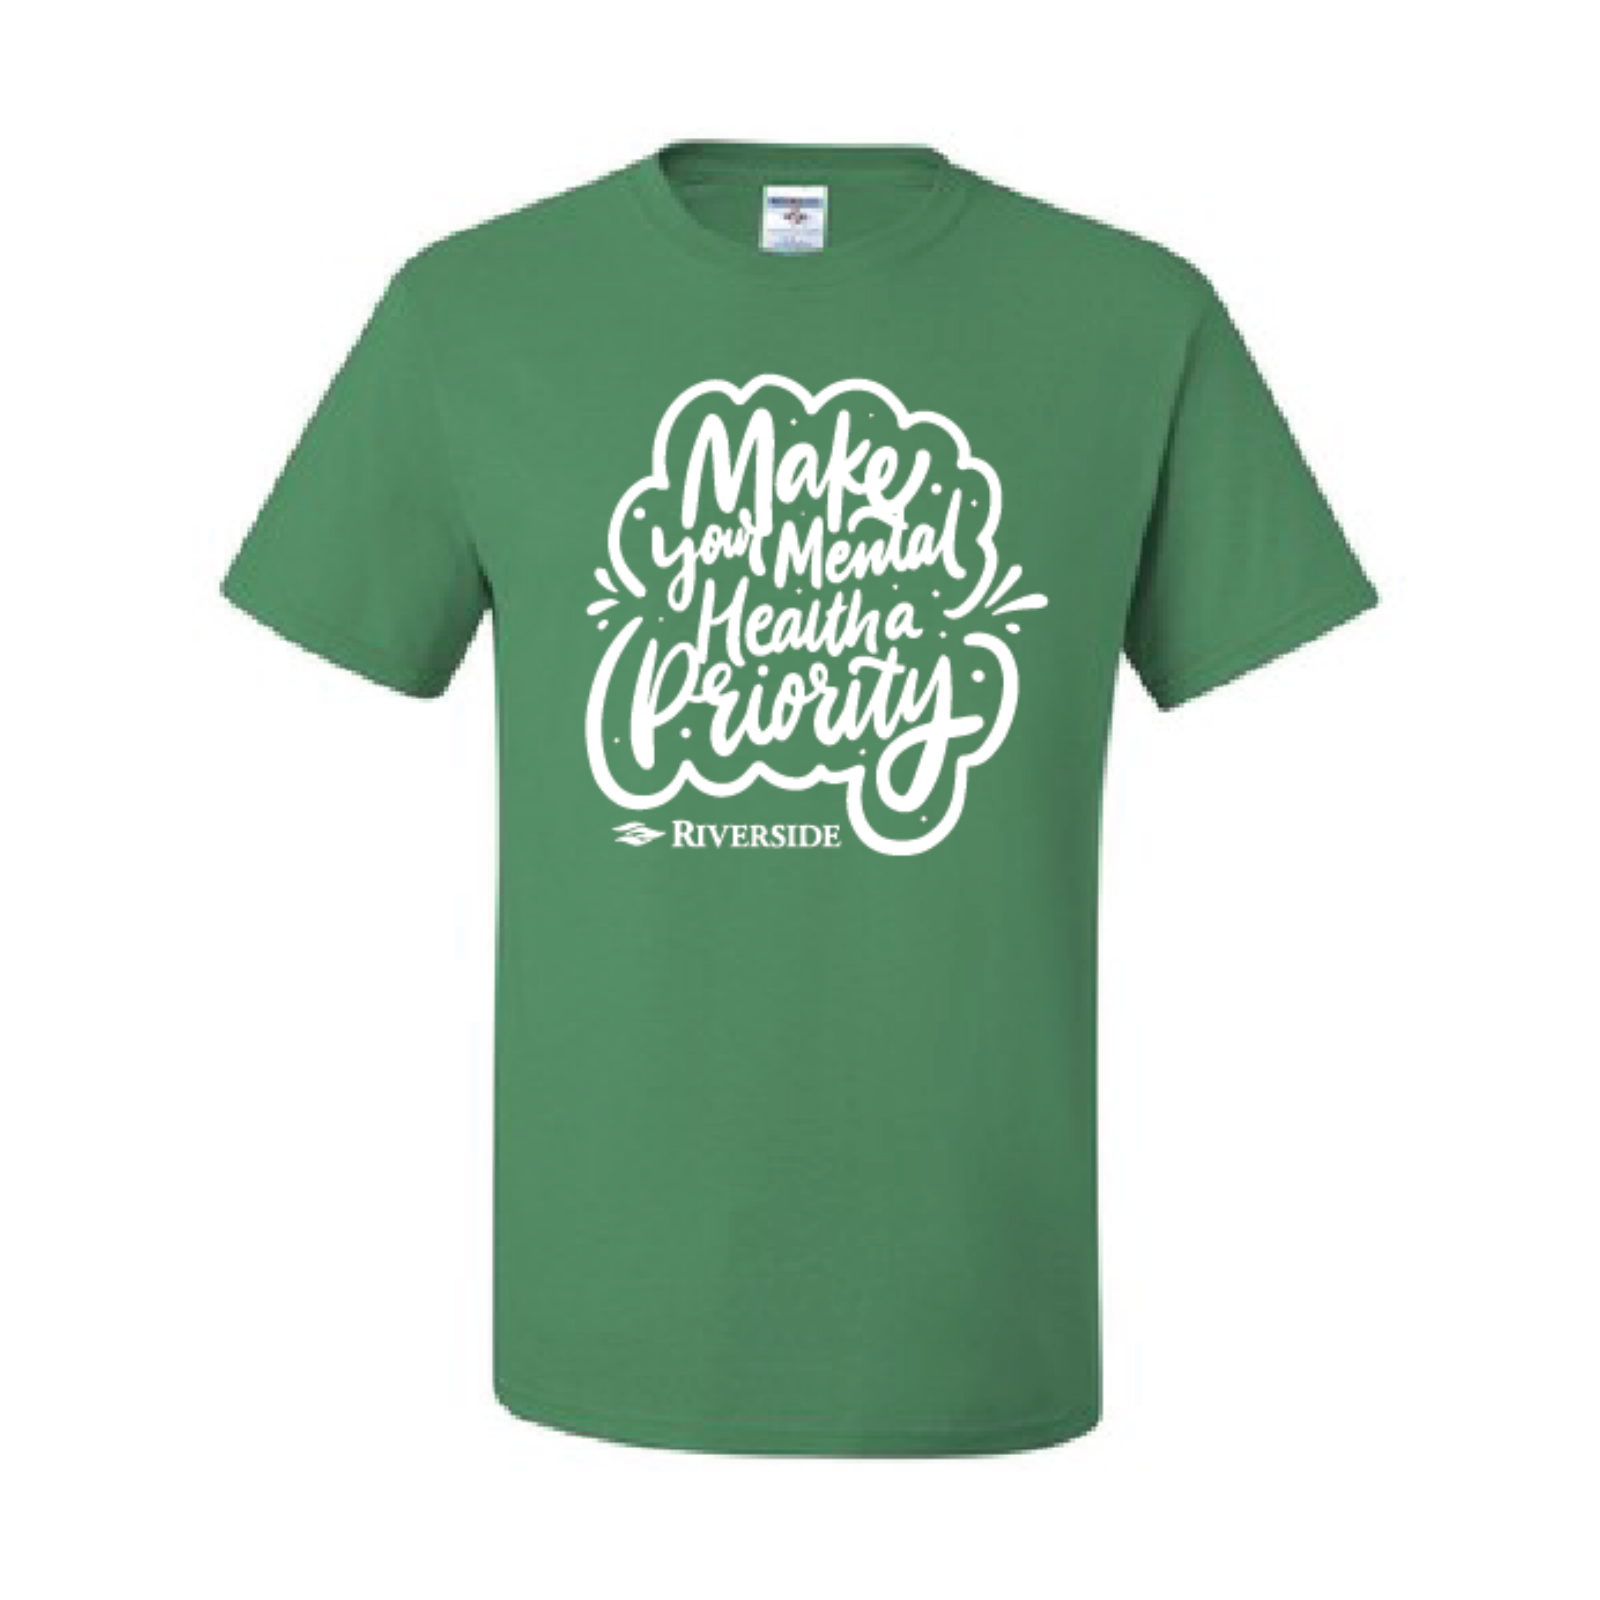 Limited Edition: Make Your Mental Health a Priority Shirt – Pre-order Option Added for Sold Out Sizes!